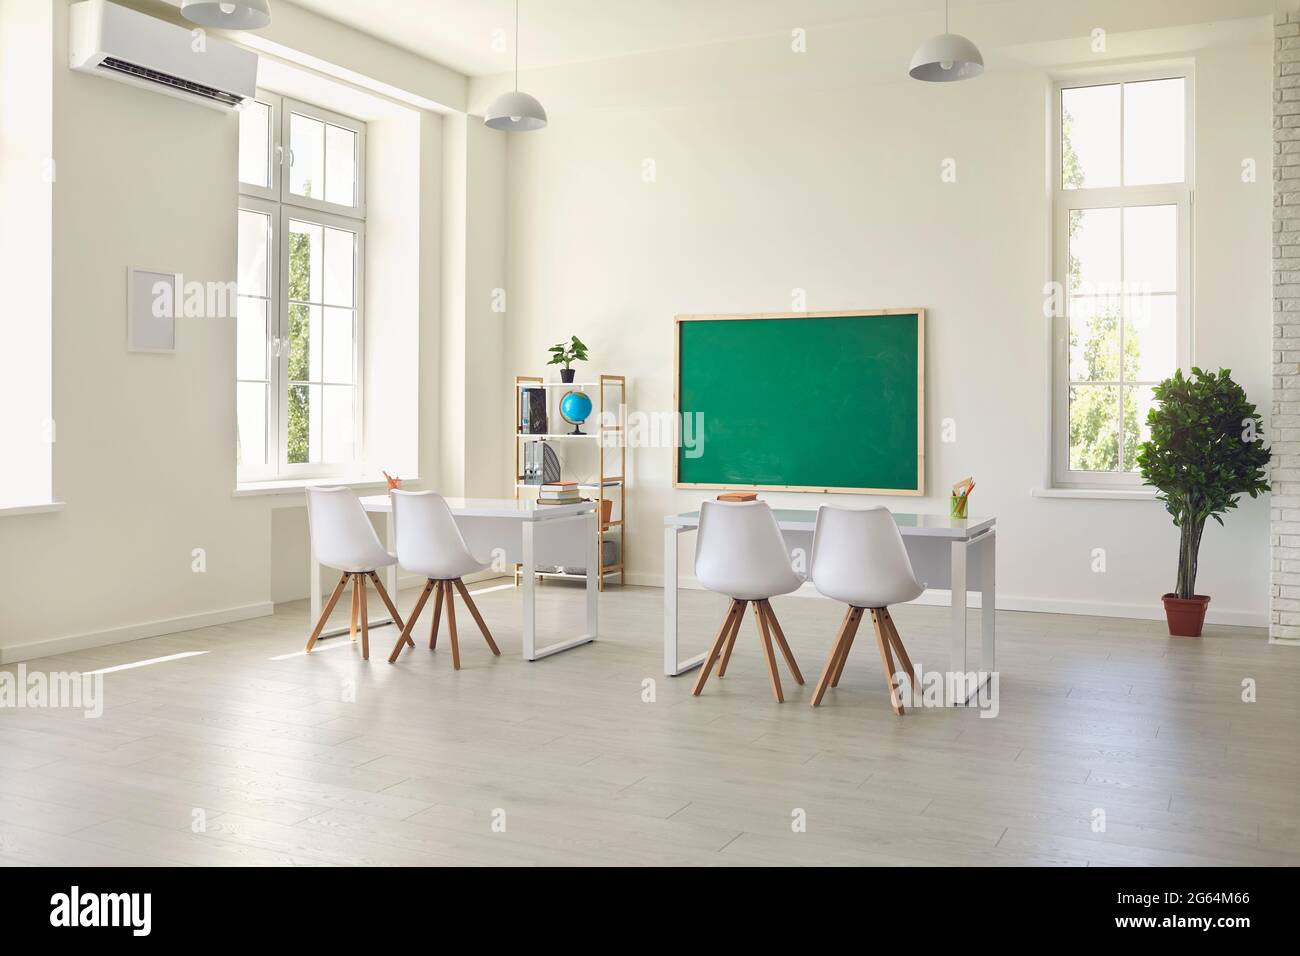 Modern empty classroom interior with desks, chairs and chalkboard. Light schoolroom with comfy furniture and big windows Stock Photo